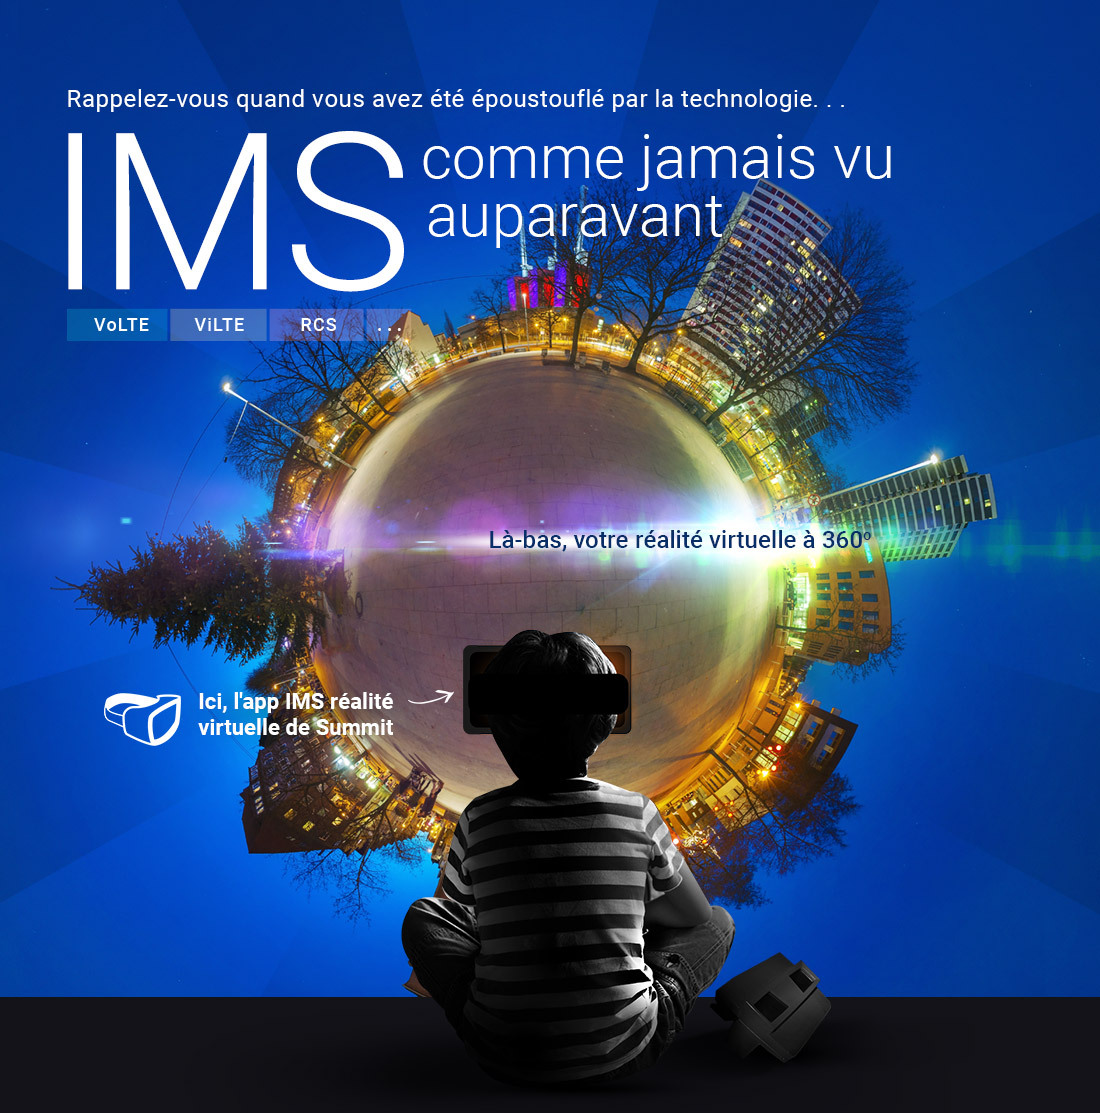 Remember when you were blown away by technology... IMS as never before seen. Out there you 360 degree virtual reality - In here, Summit VR IMS stack